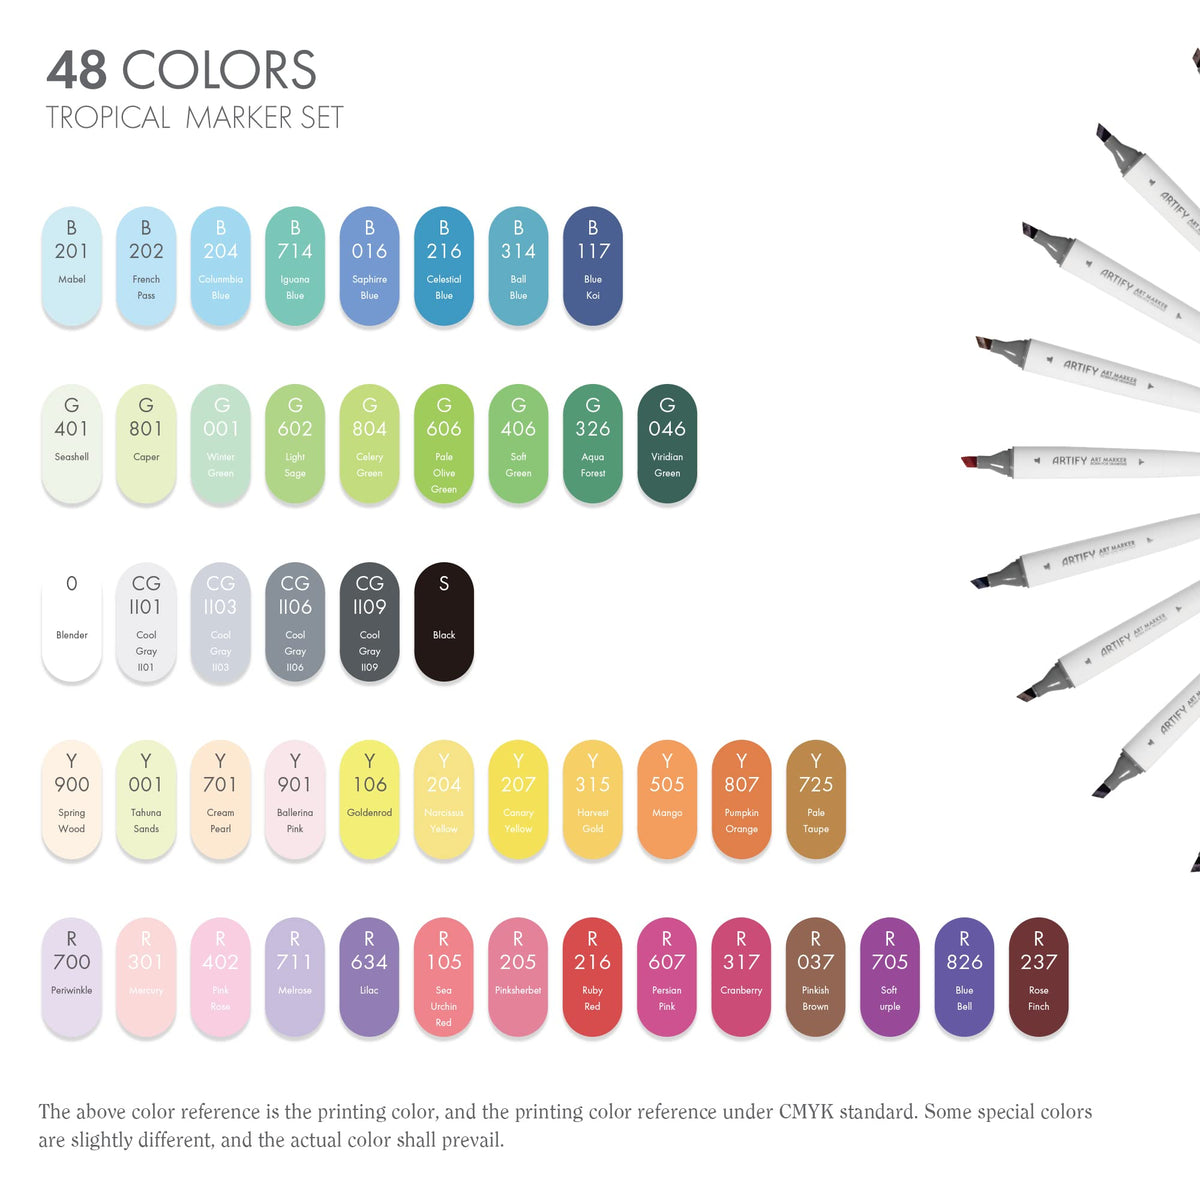 ARTIFY art supplies The Bundle of 48 Color Alcohol New Zealand